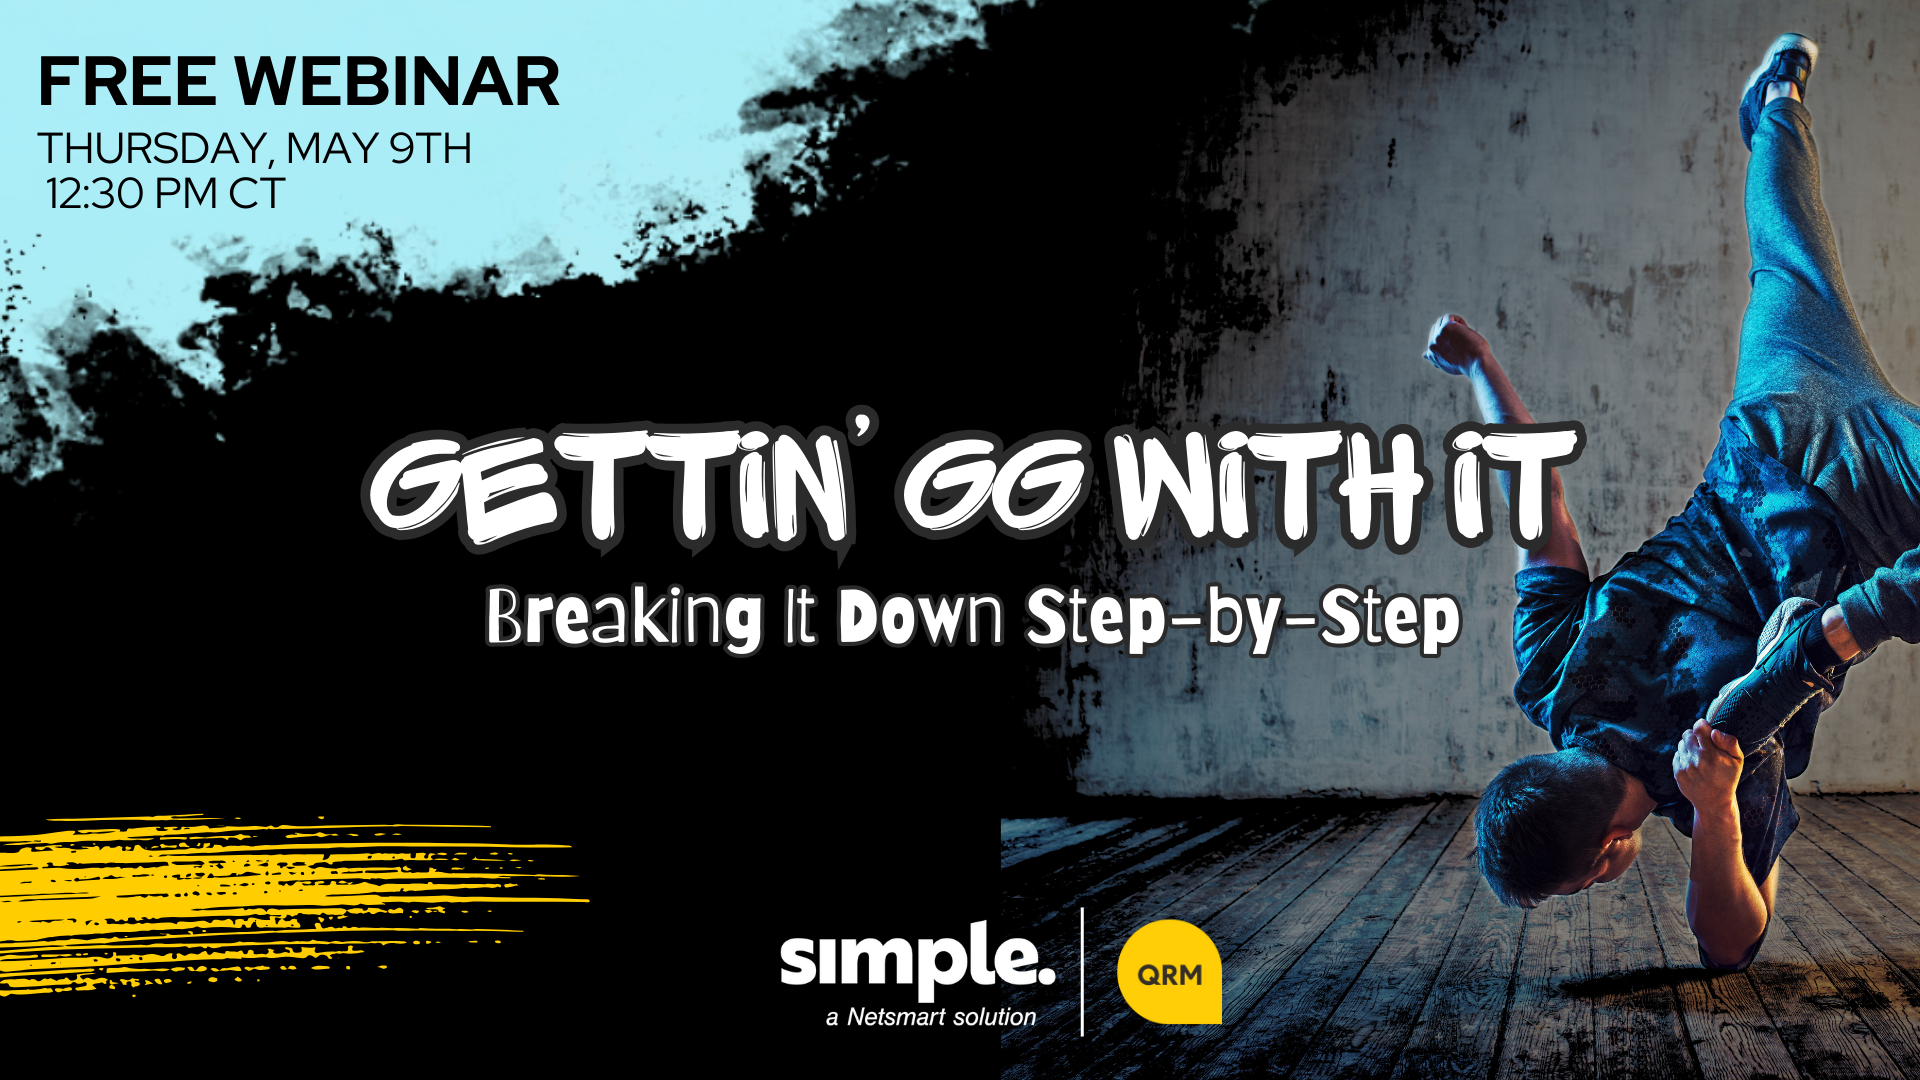 Featured image for “[Free webinar] Gettin’ GG With It: Breaking It Down Step-by-Step”